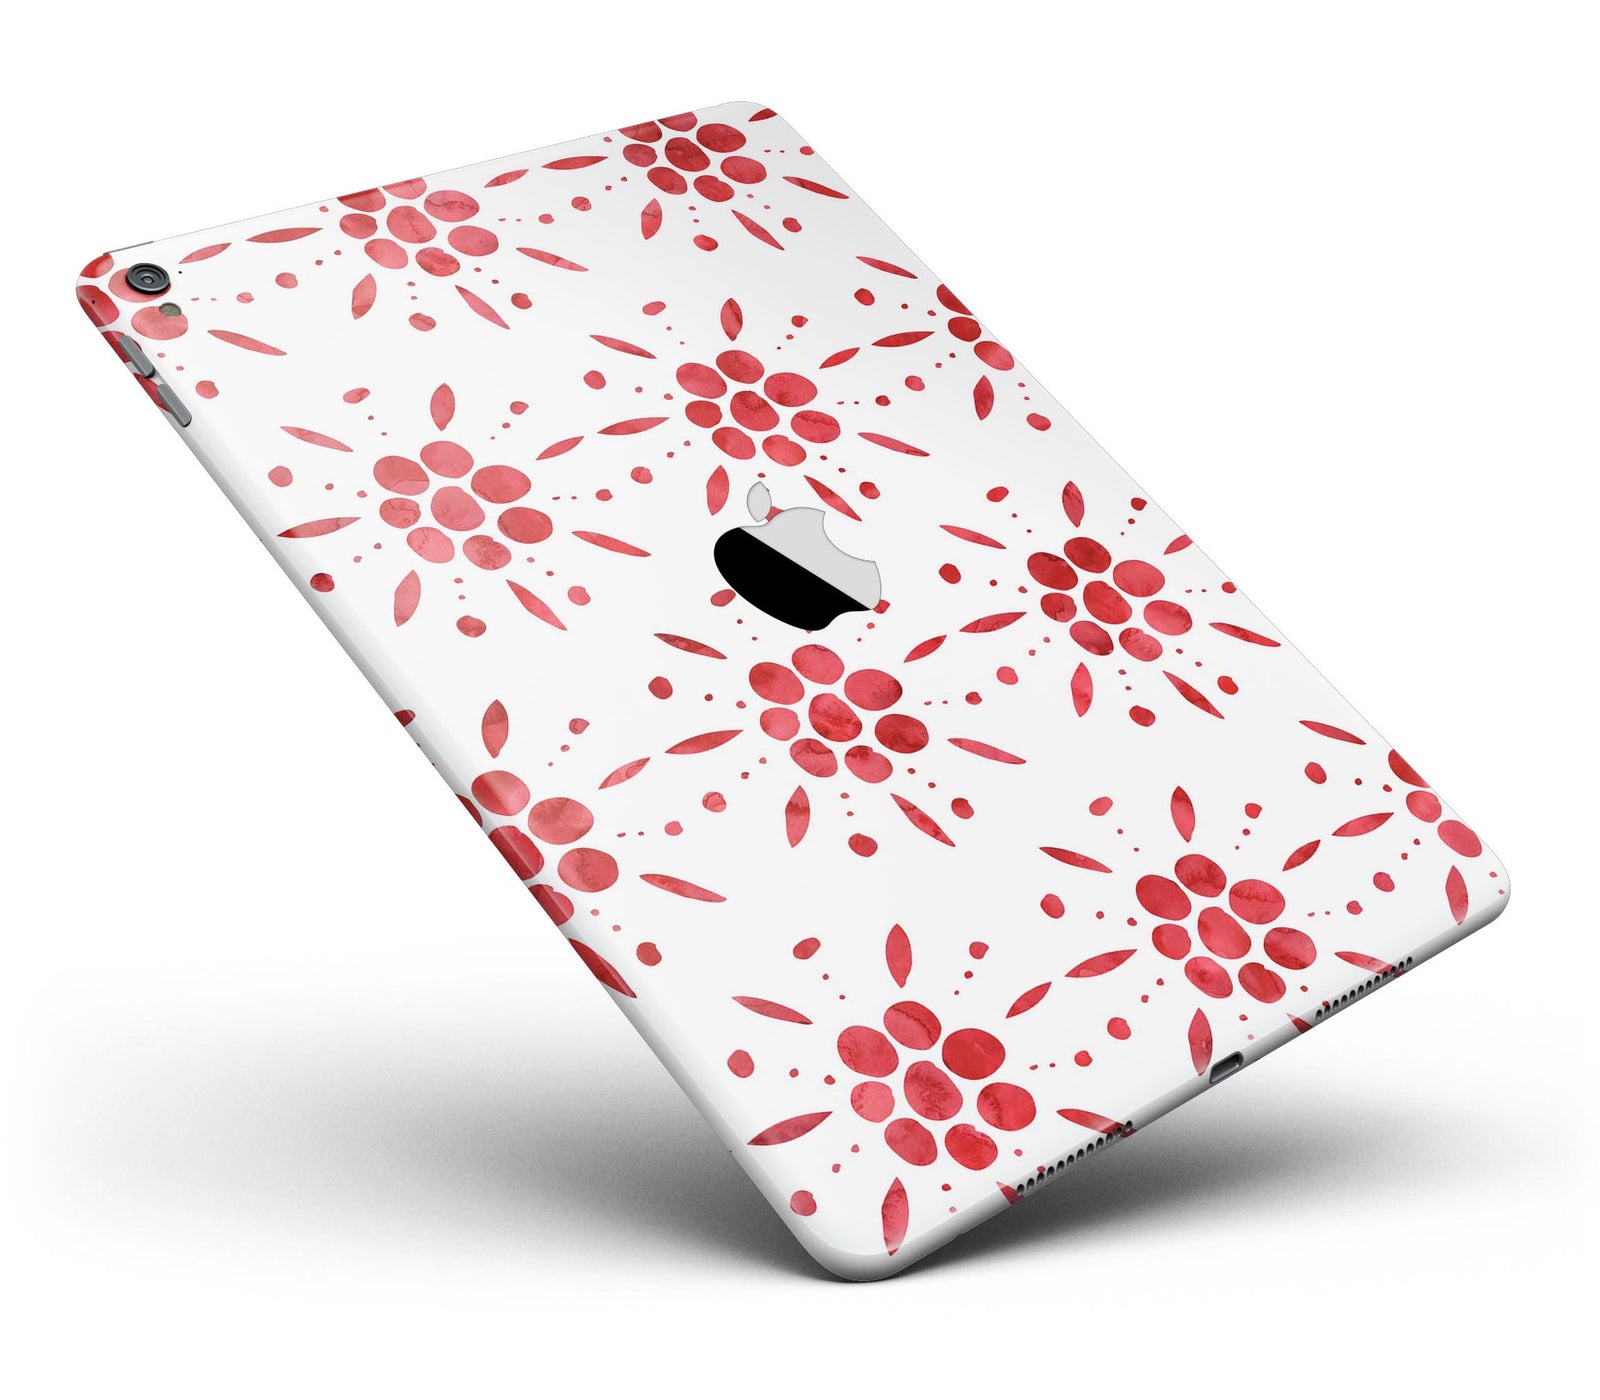 The Abstract Red Flower Pedals Full Body Skin for the iPad Pro (12.9 ...